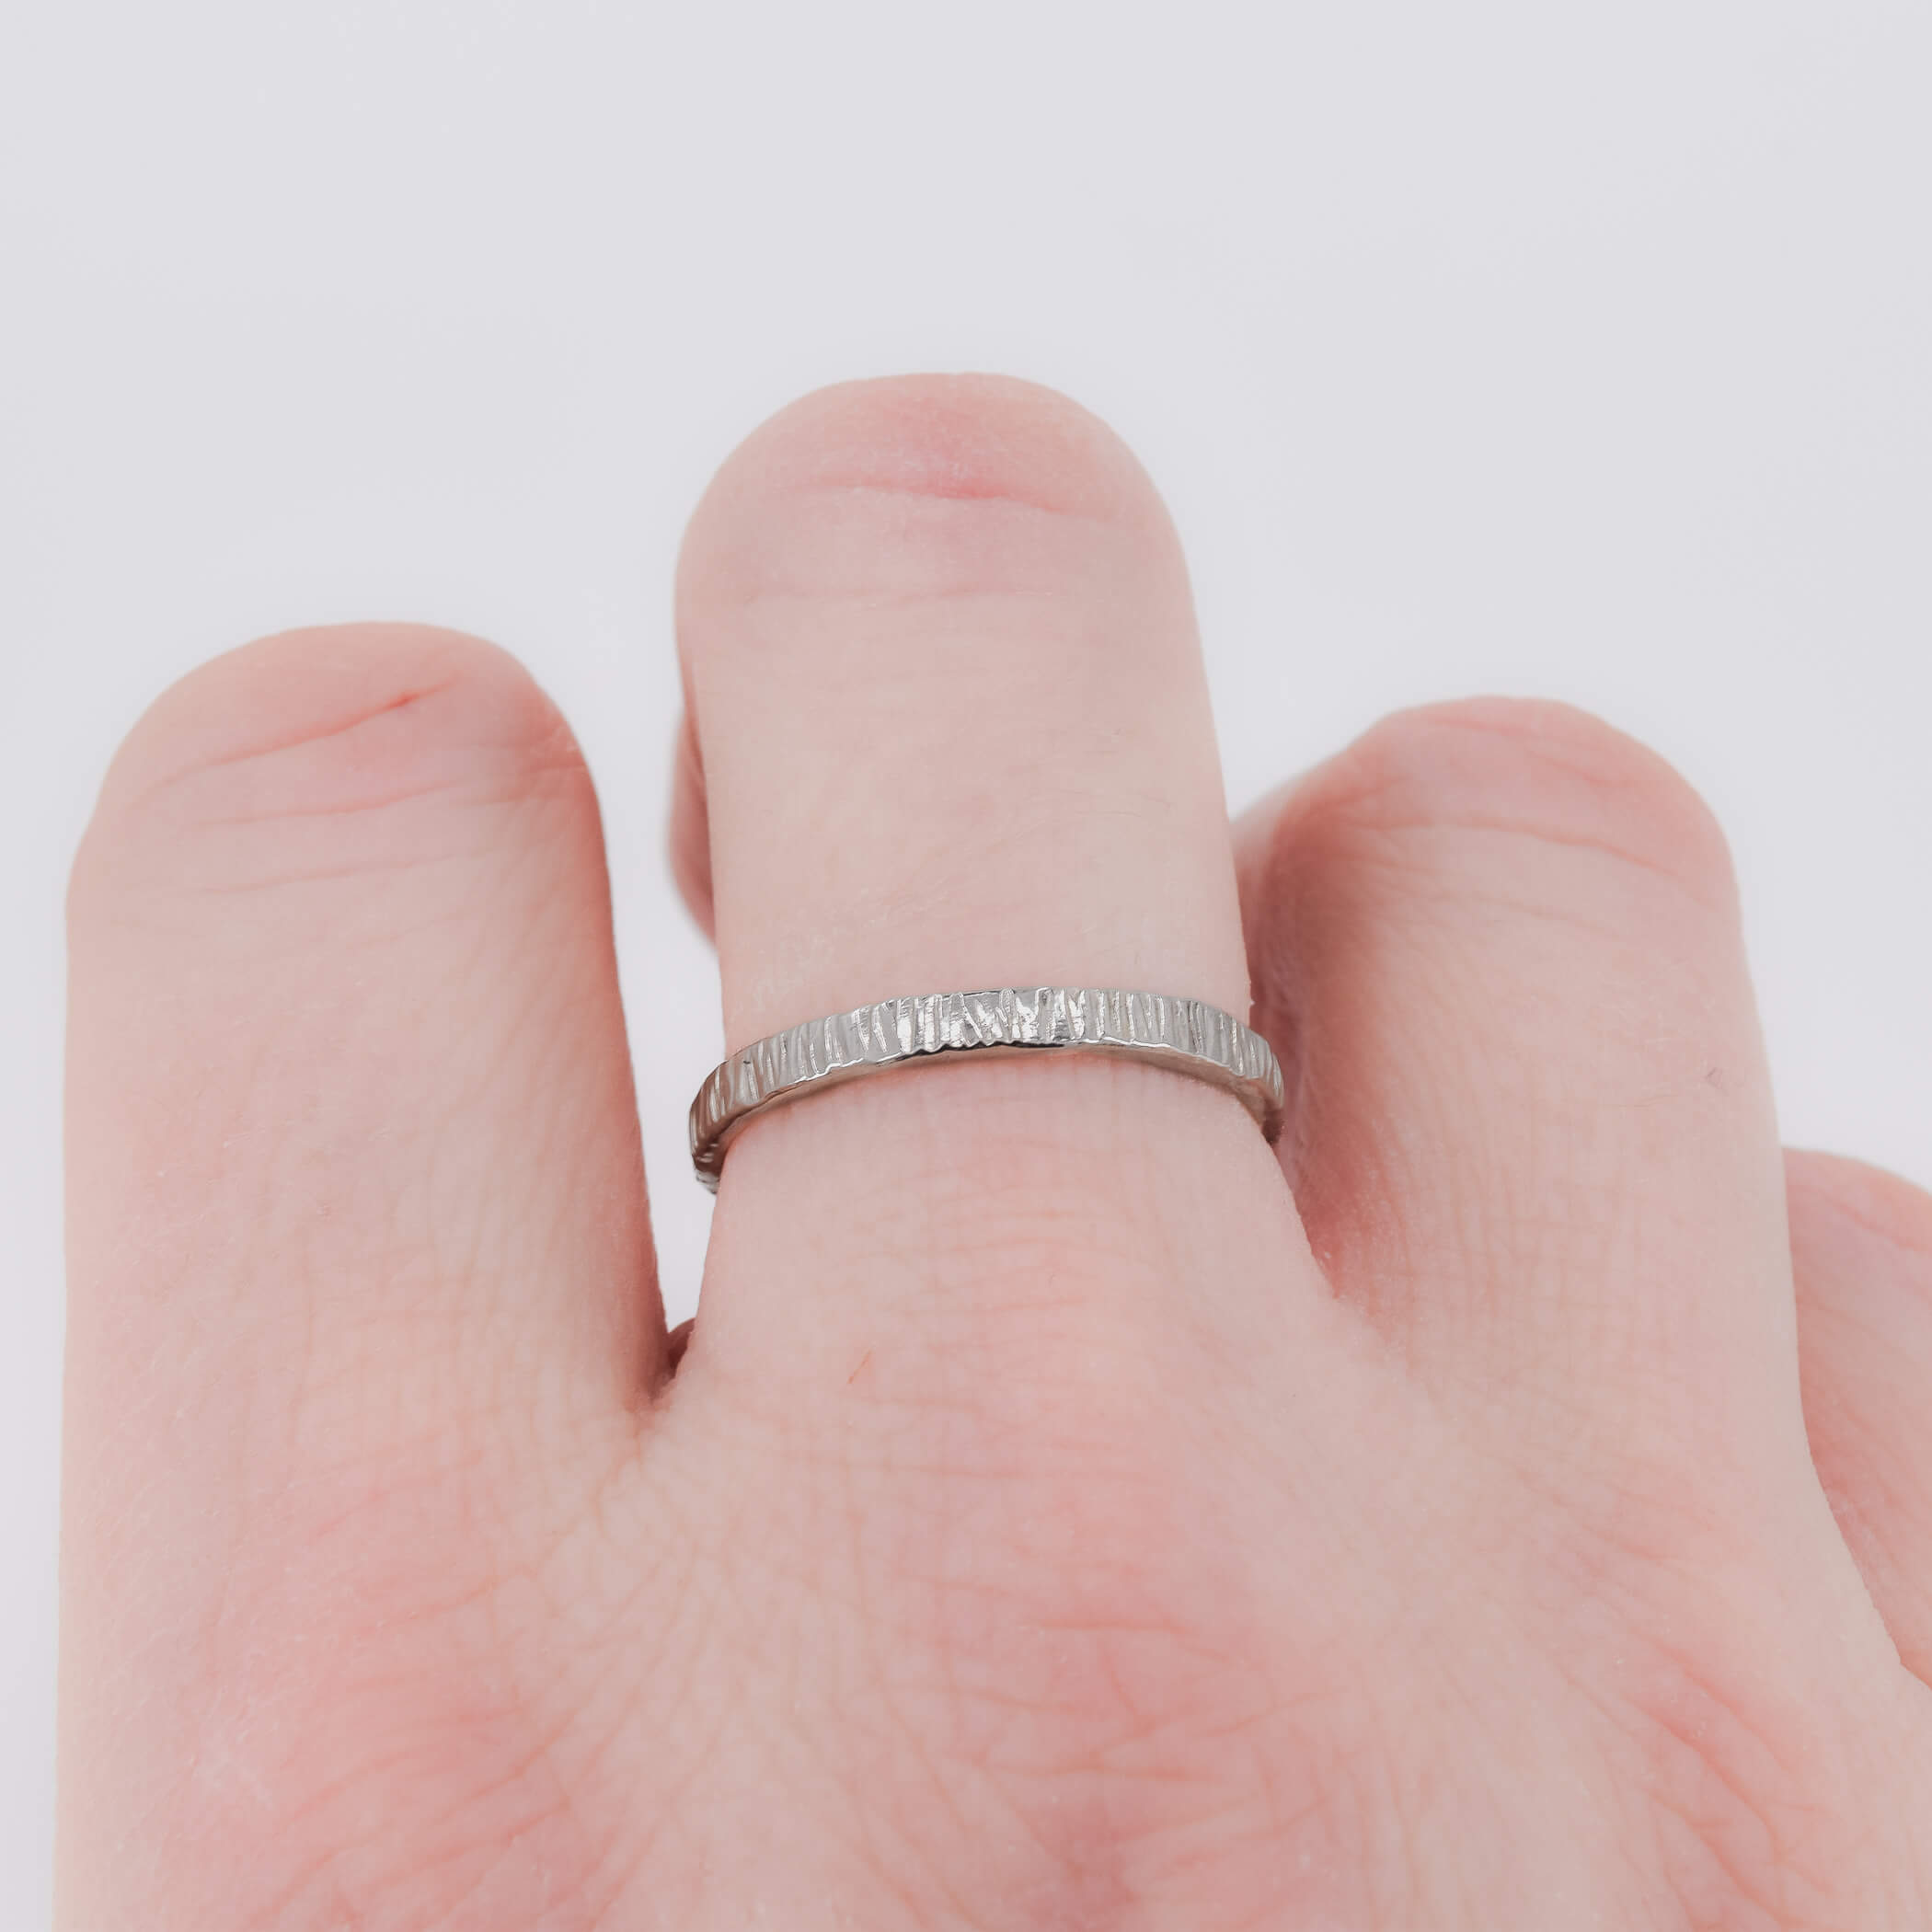 Birch tree bark sterling silver stacking ring shown on finger